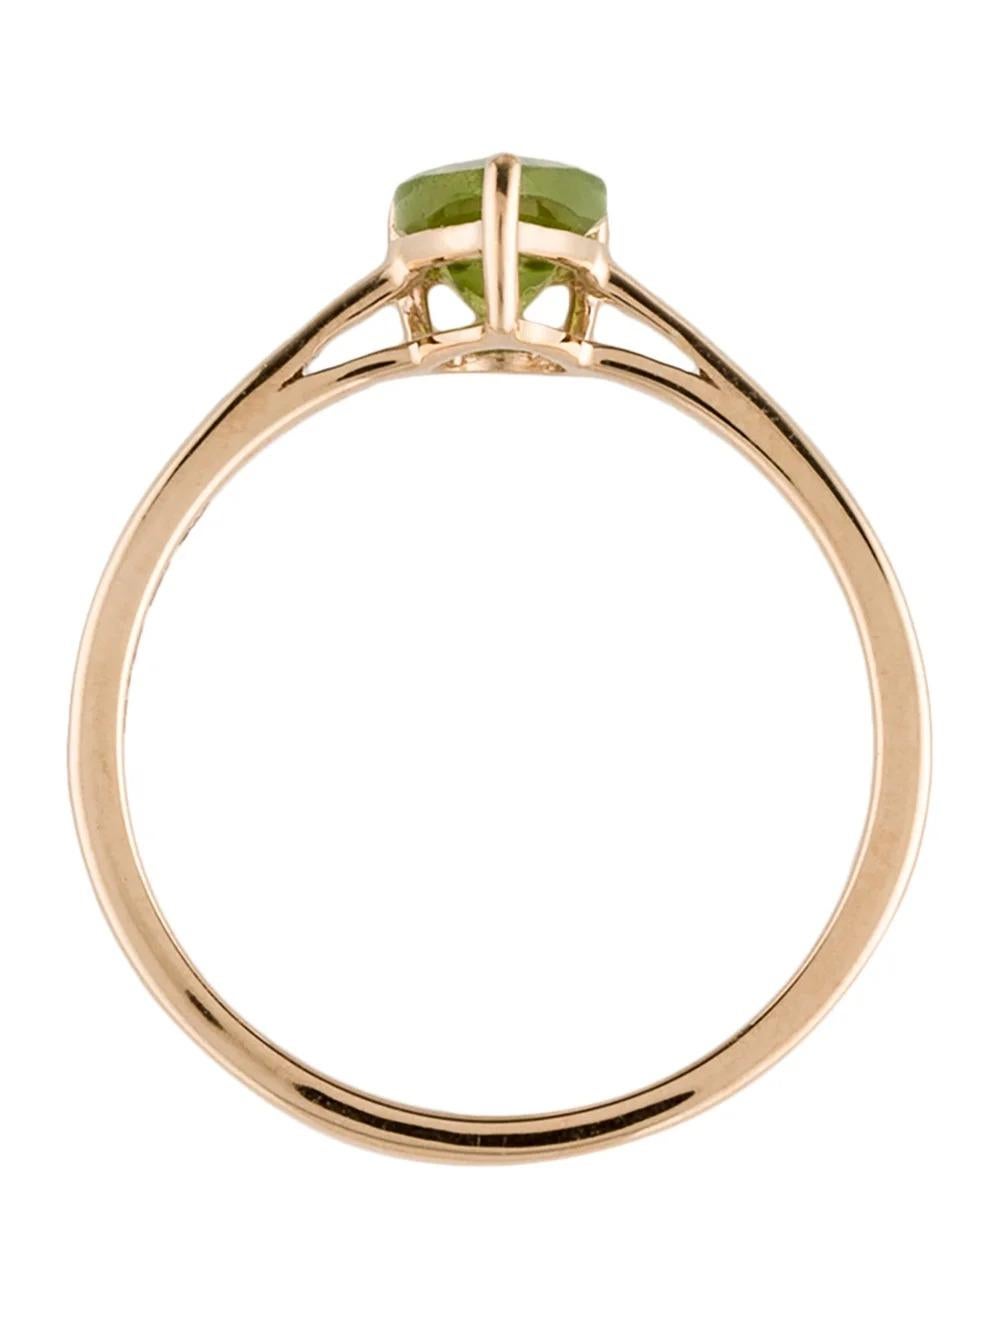 Women's 14K Peridot Cocktail Ring Size 6.75 - Green Gemstone, Statement Jewelry For Sale